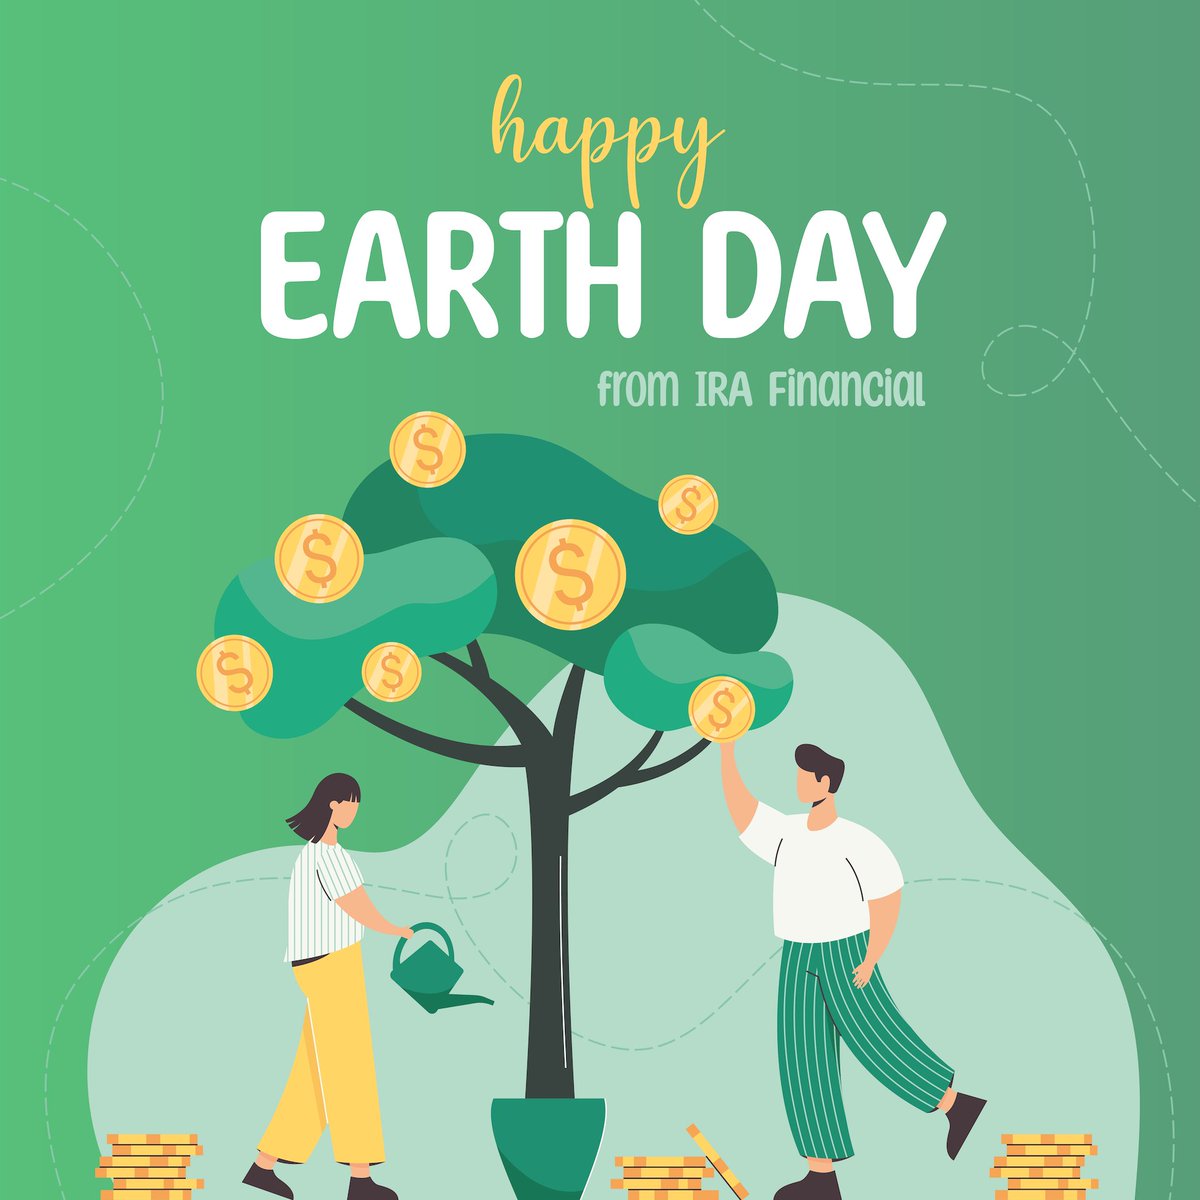 Happy Earth Day from IRA Financial!🌳 Looking to plant seeds and invest in your future? Contact us today and learn more about self-directed retirement options!